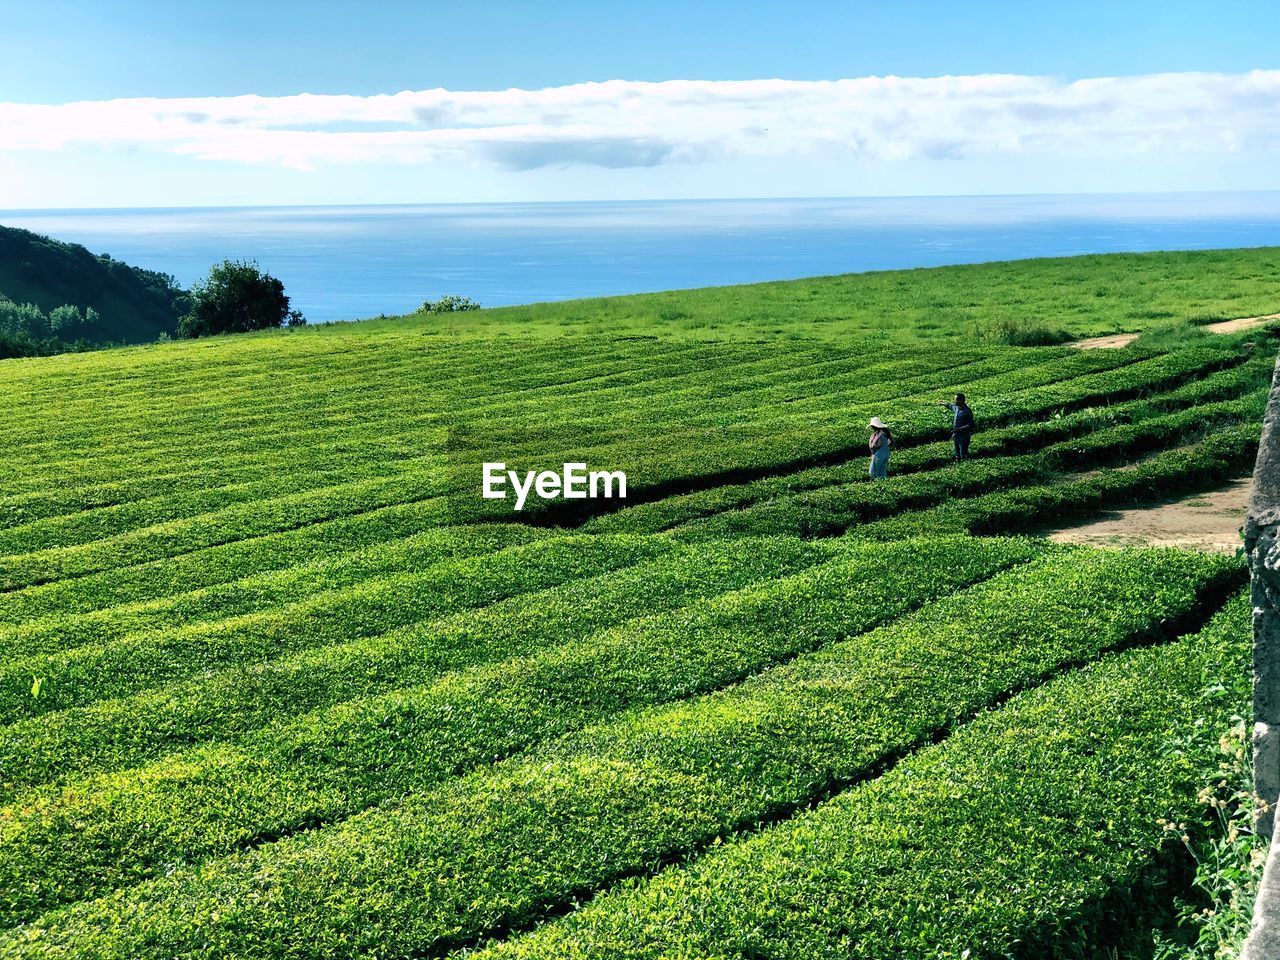 Scenic view of agricultural field against sea